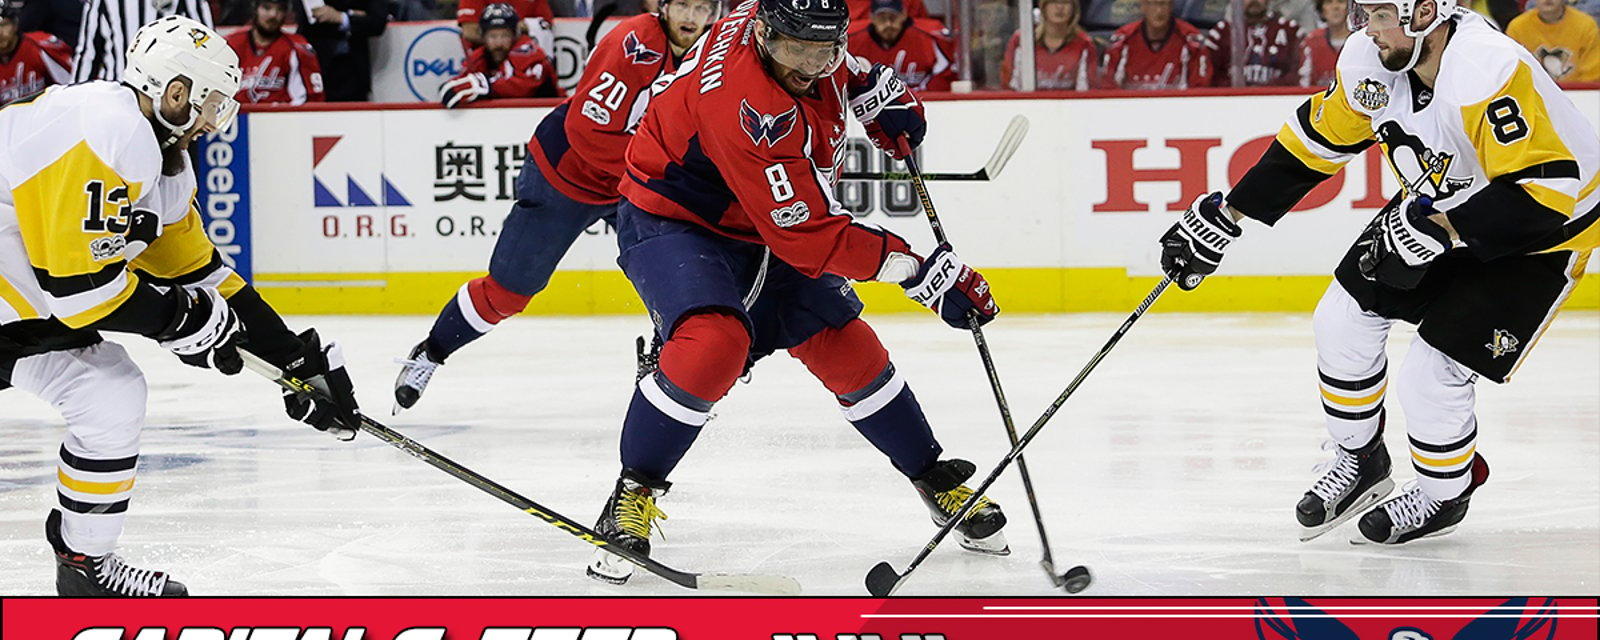 5 reasons the Capitals won’t trade Ovechkin